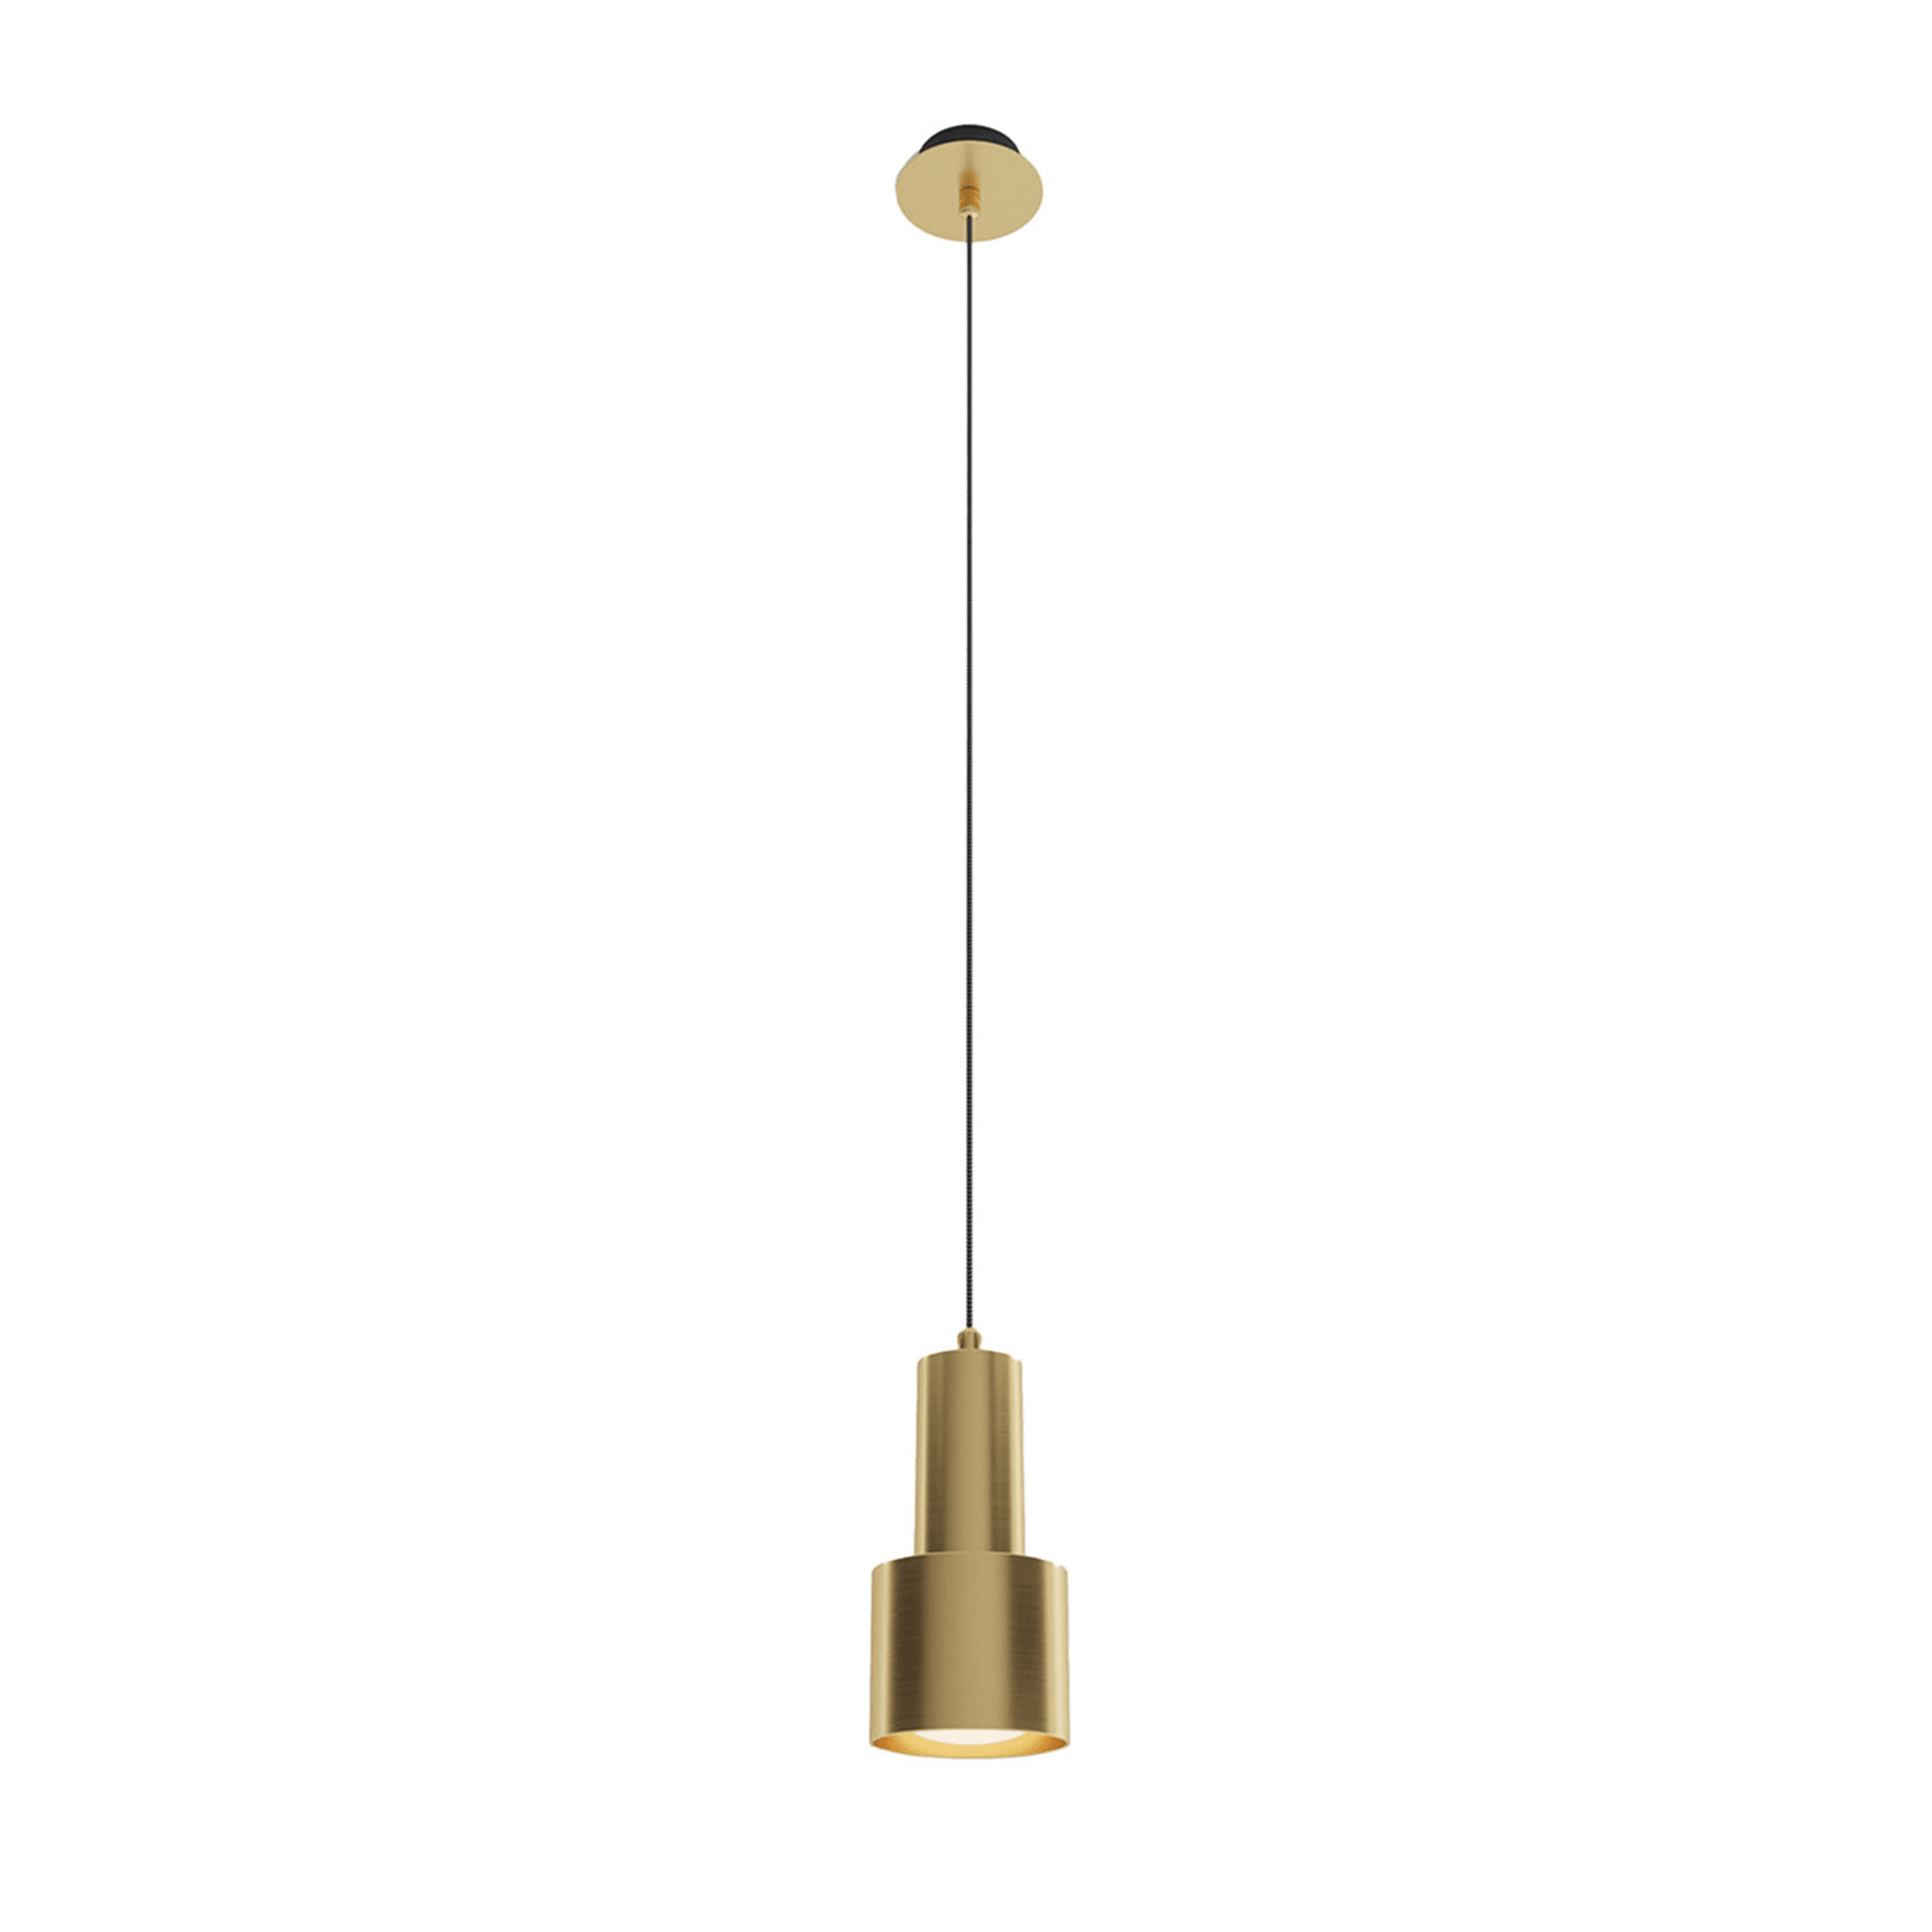 Light Gallery Luxury GP Bronzed Pendant Lamp by Marco Pollice - Main view